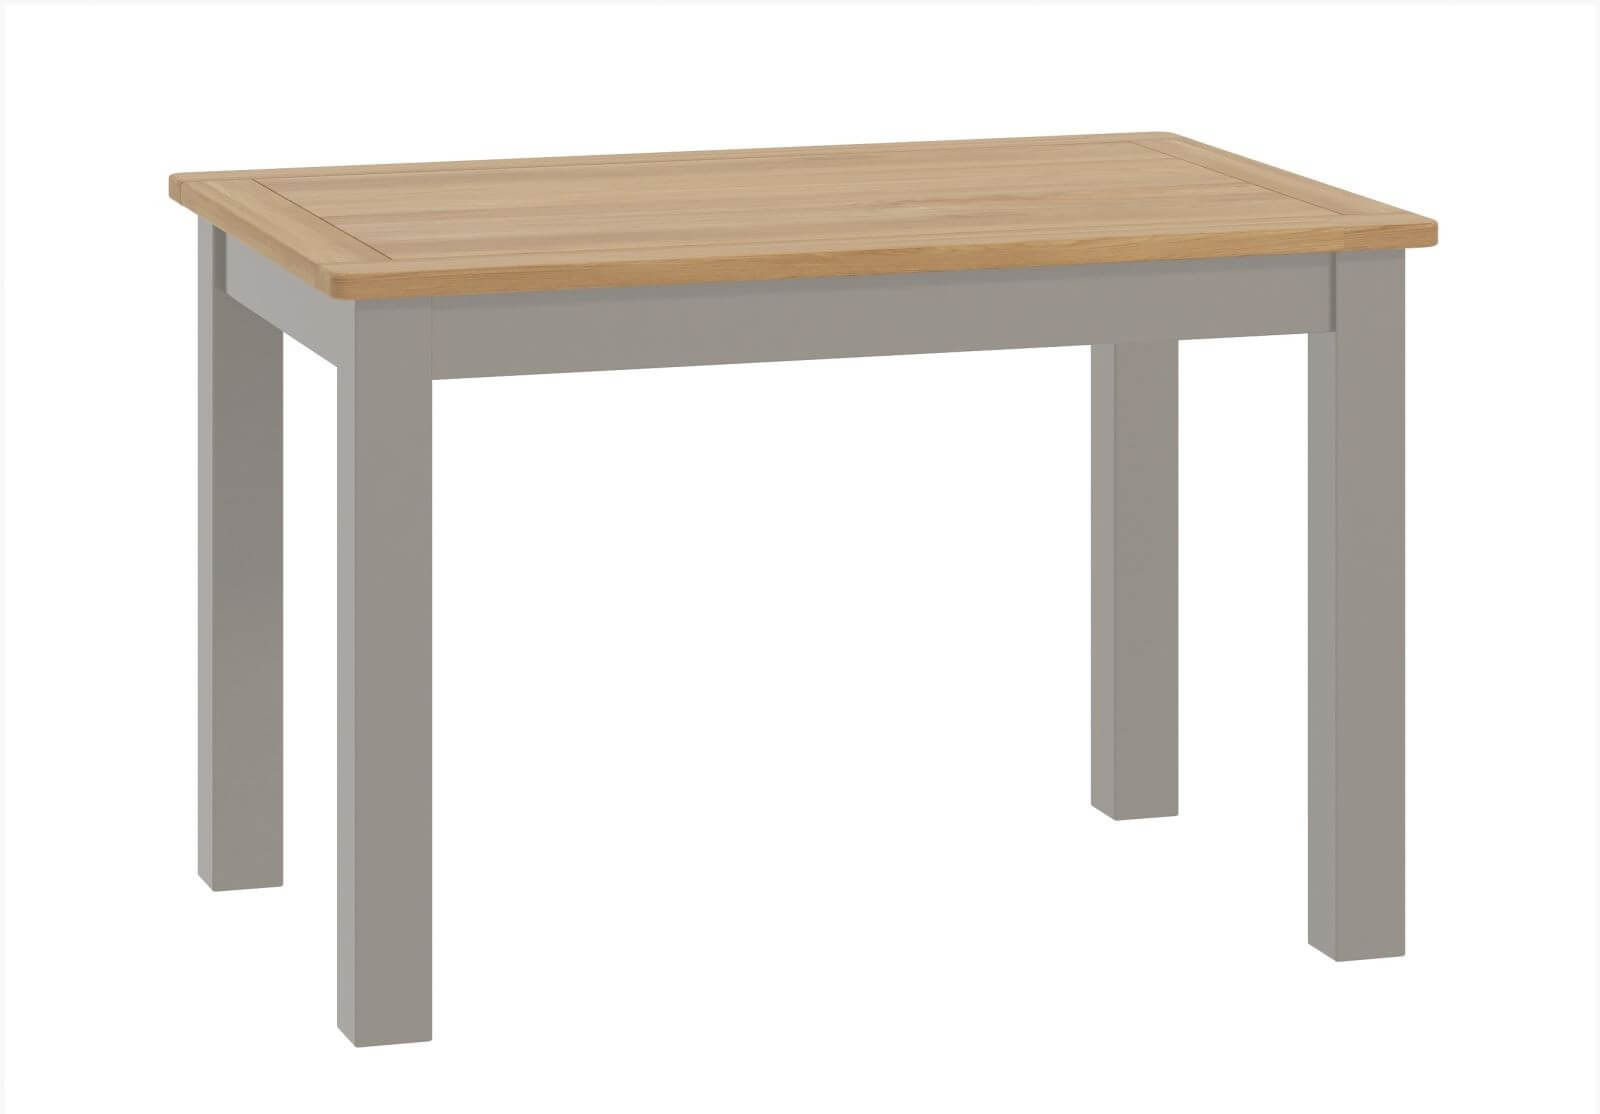 Showing image for Seattle dining table - stone